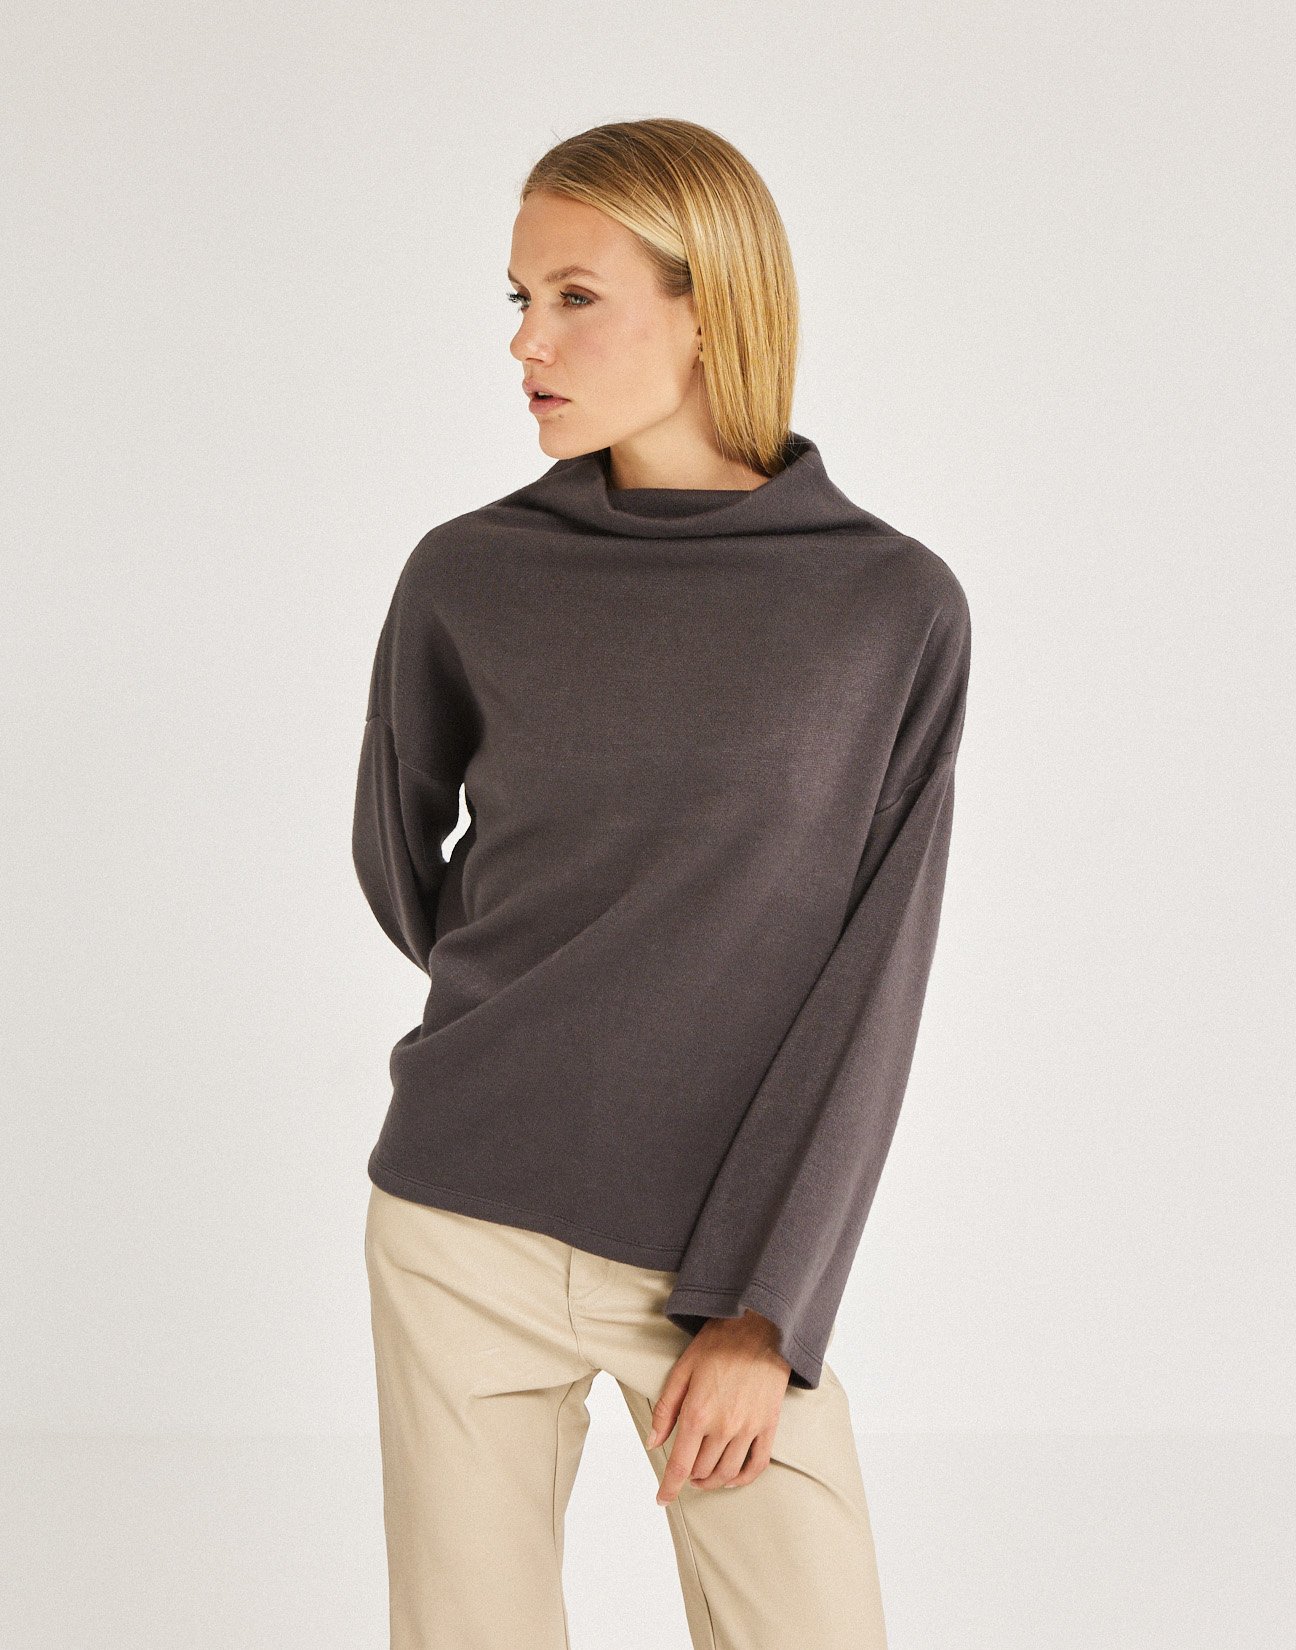 Blouse with high neck